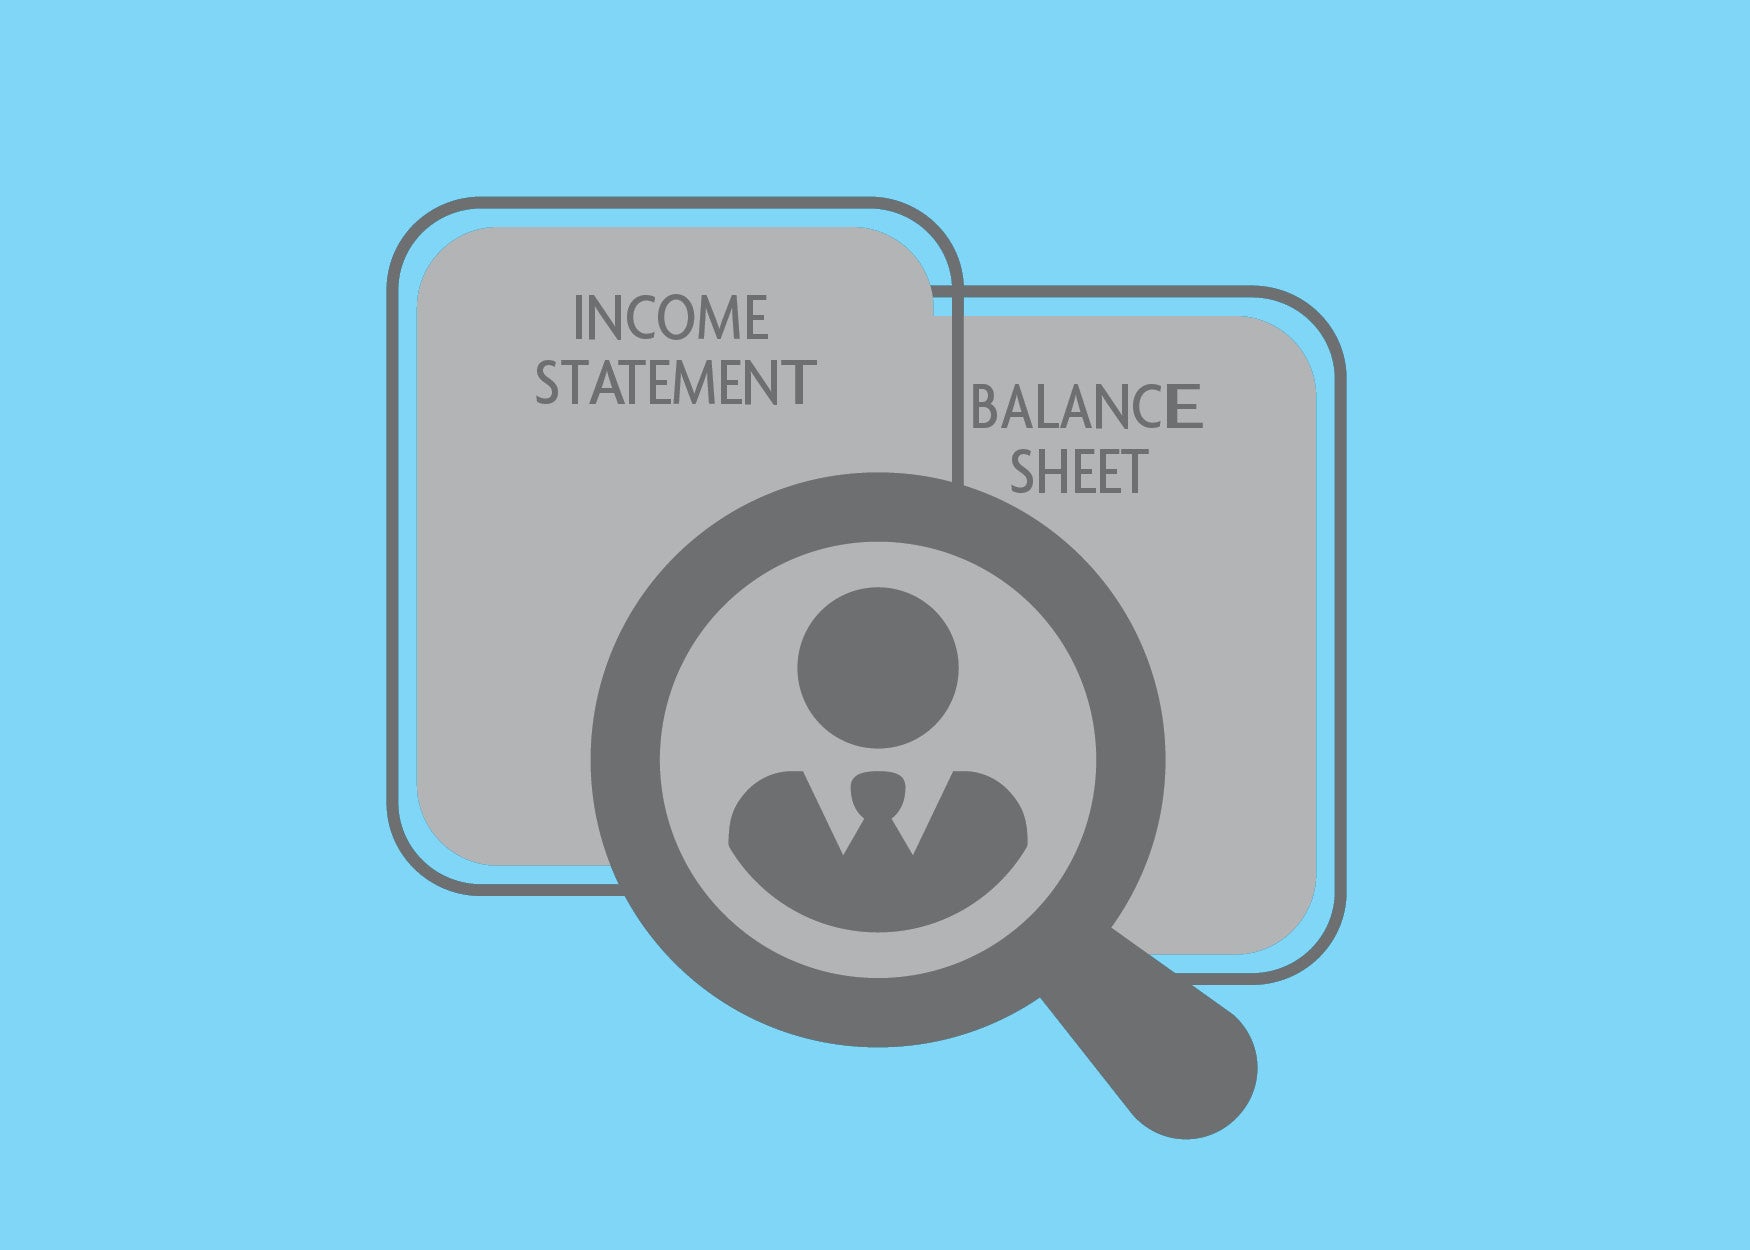 Income Statement and Balance sheet icons with a magnifying glass